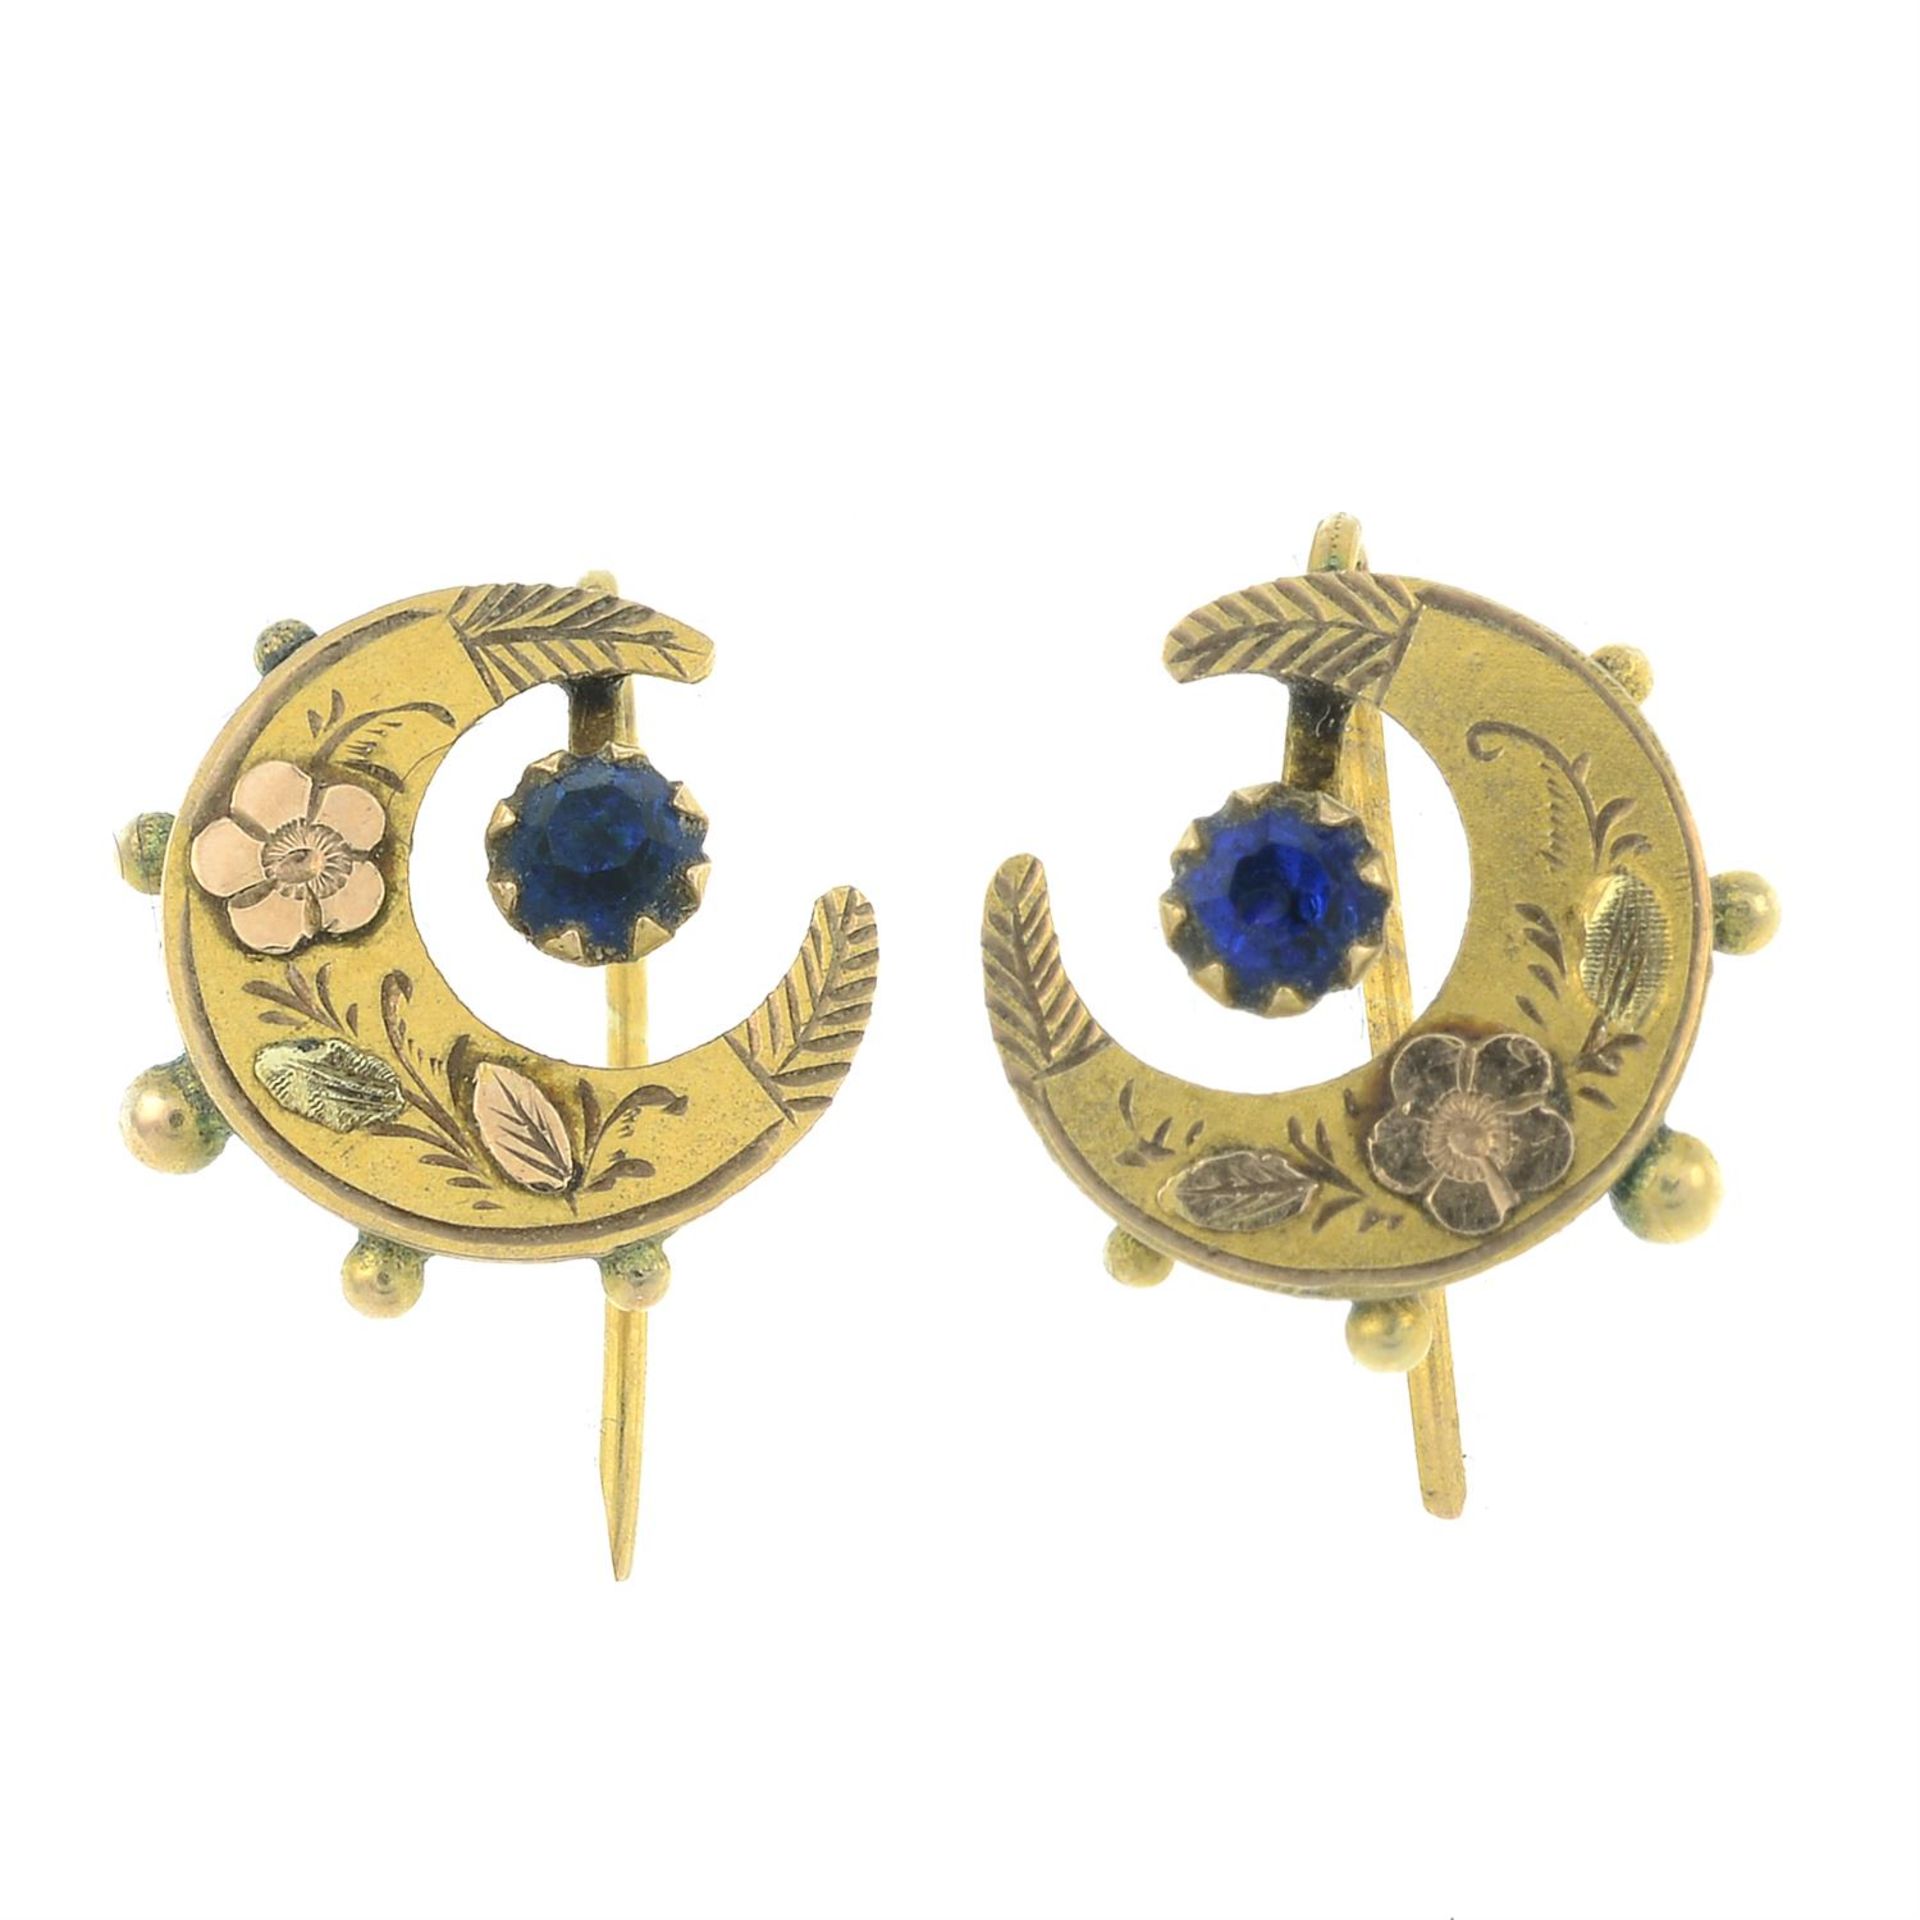 A pair of early 20th century 9ct gold bi-colour crescent earrings, each with blue paste accent.